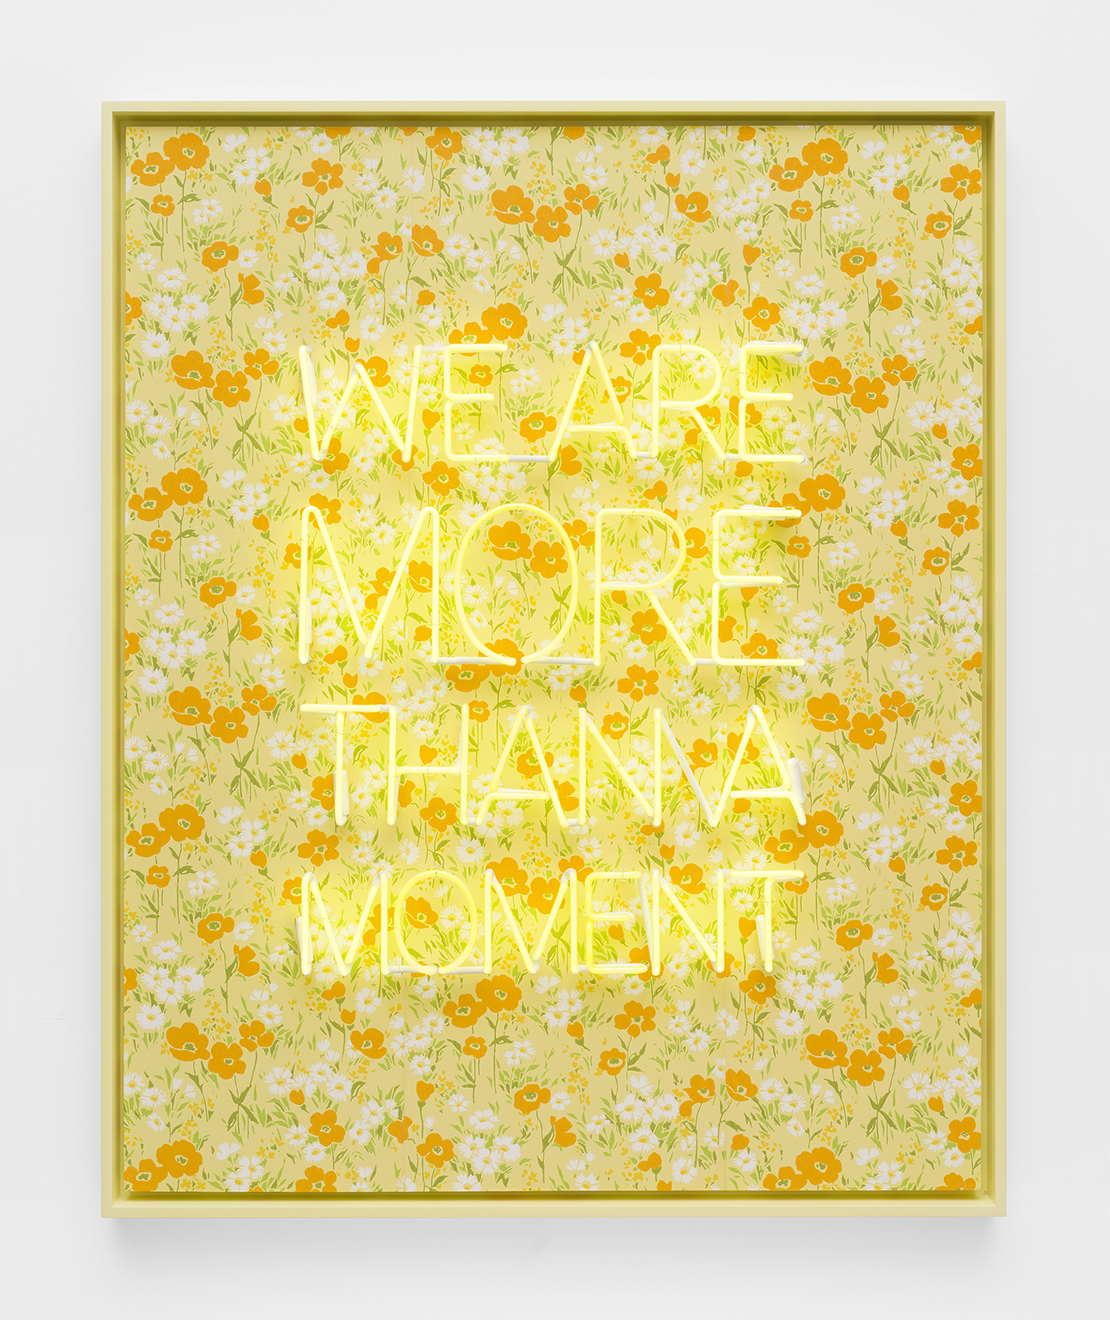 We Are More Than A Moment